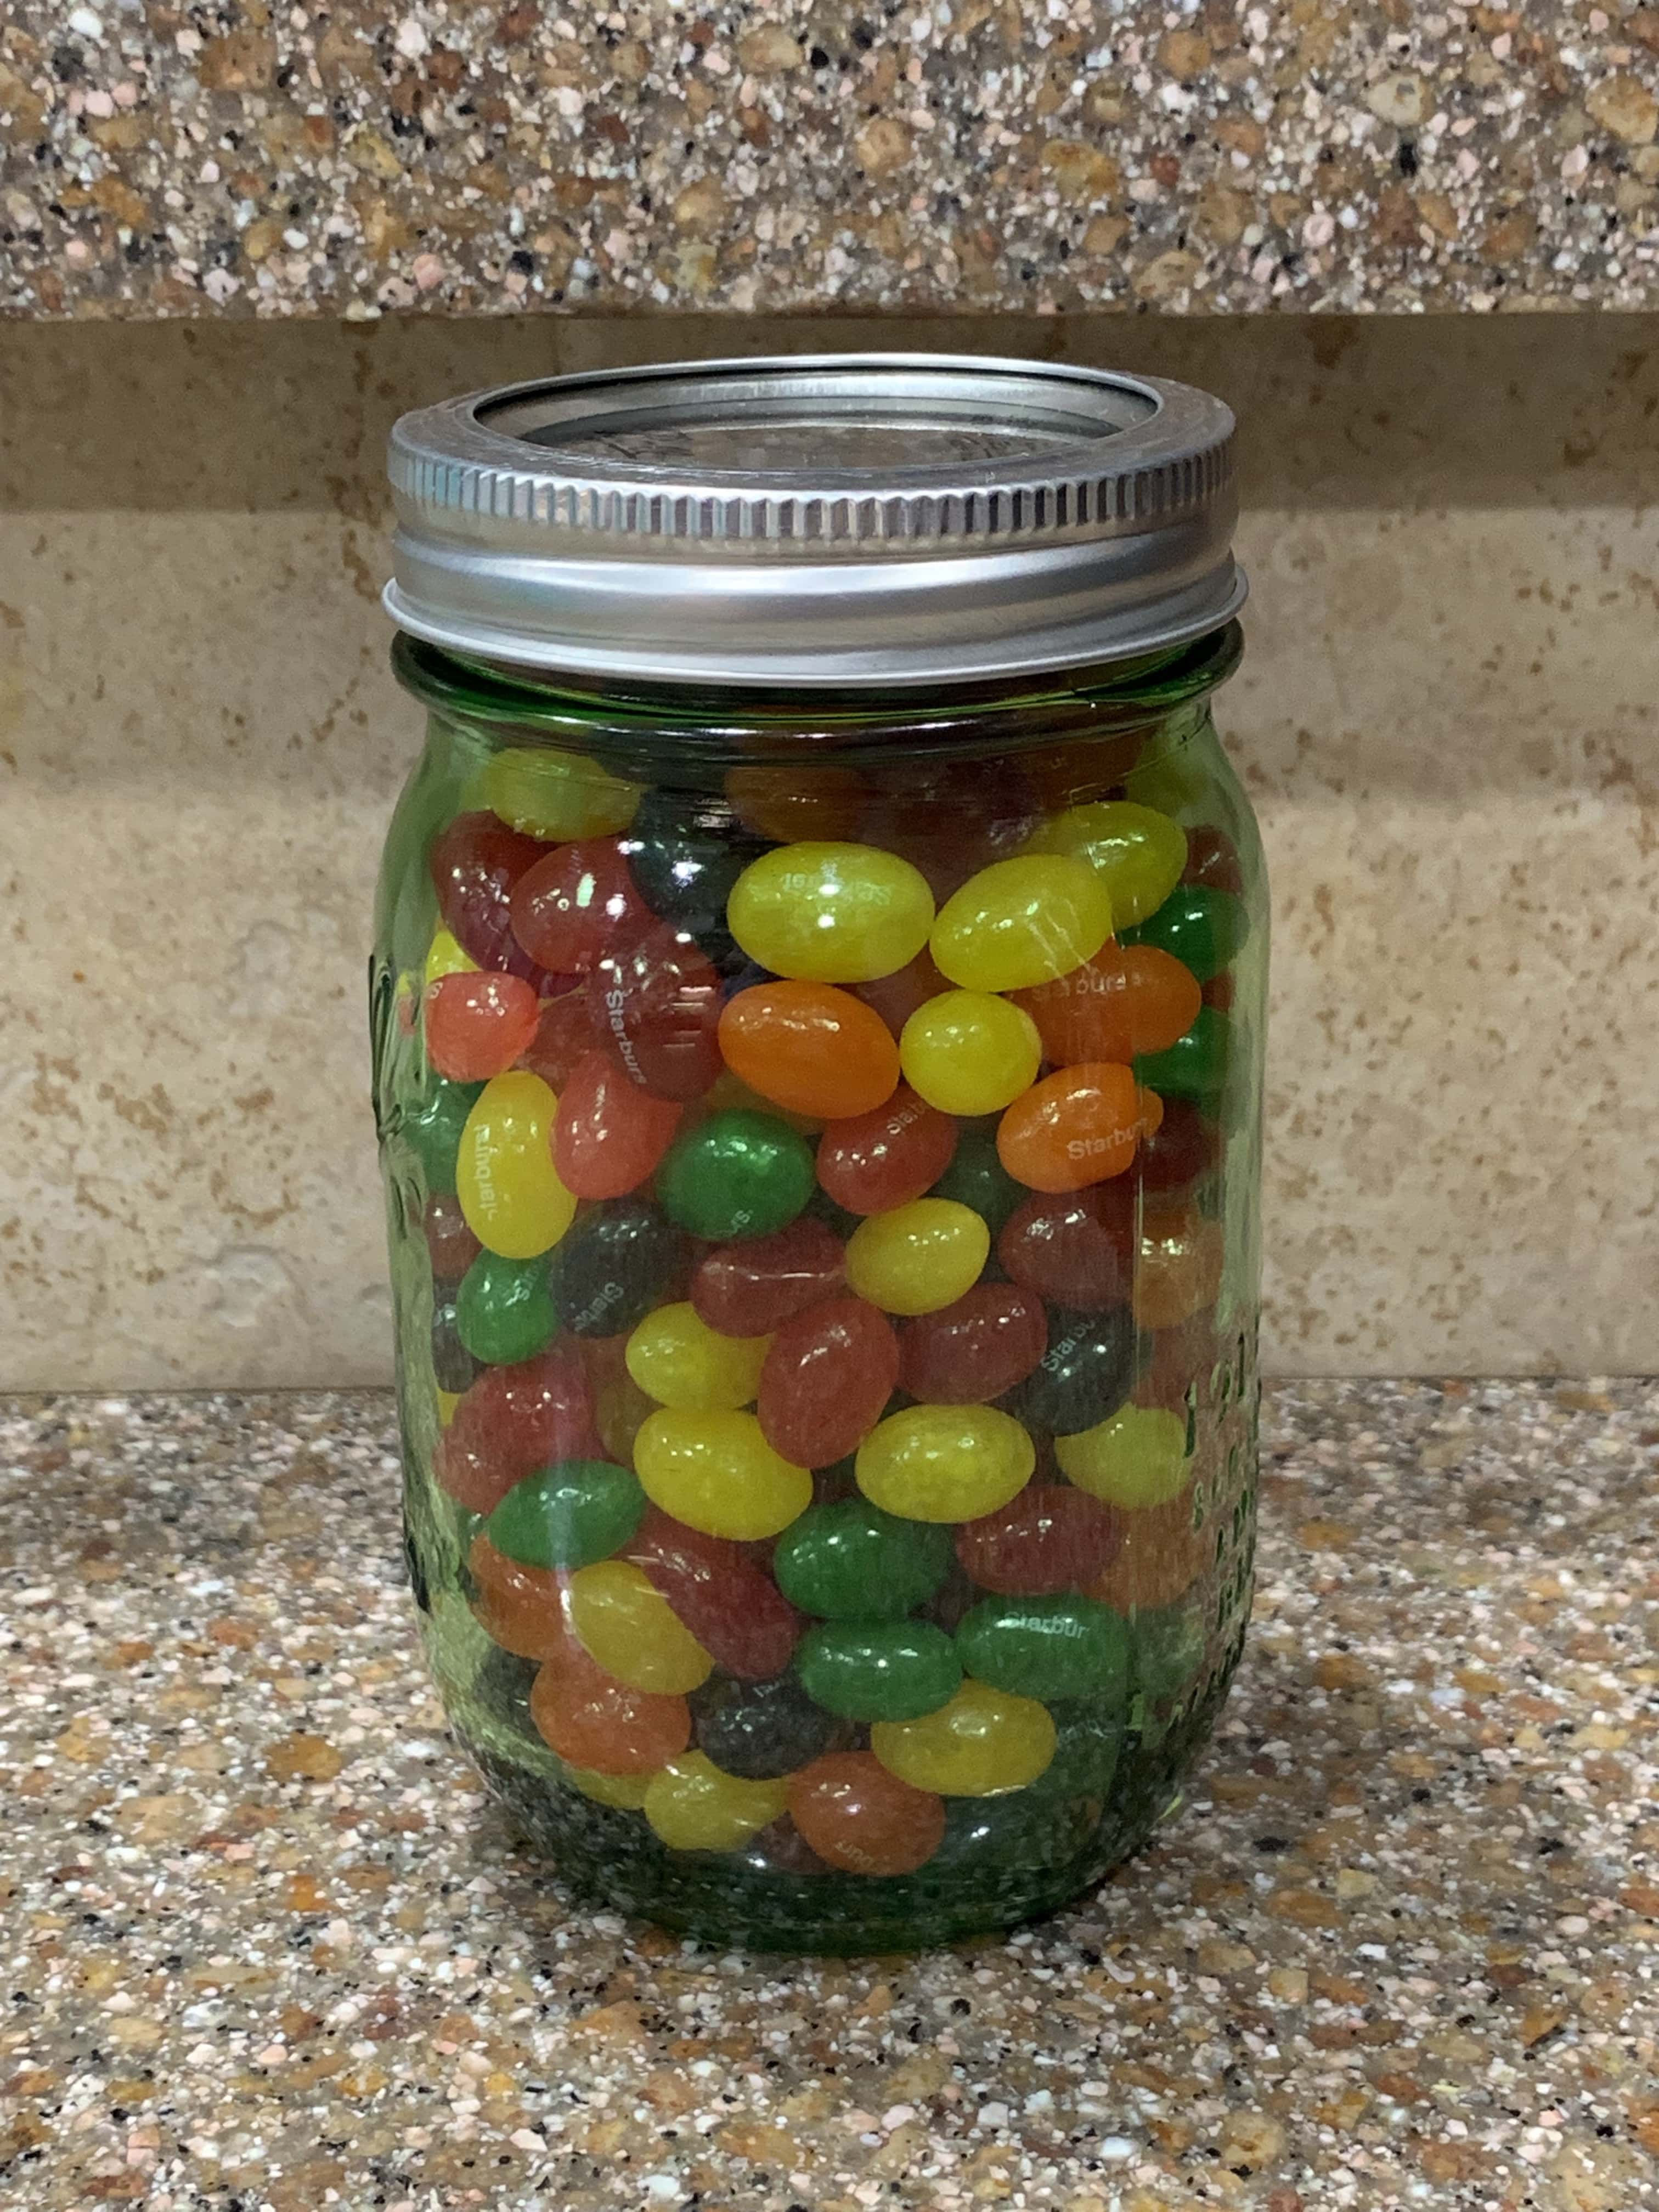 How Many Jelly Beans are in a Jar Jar Can